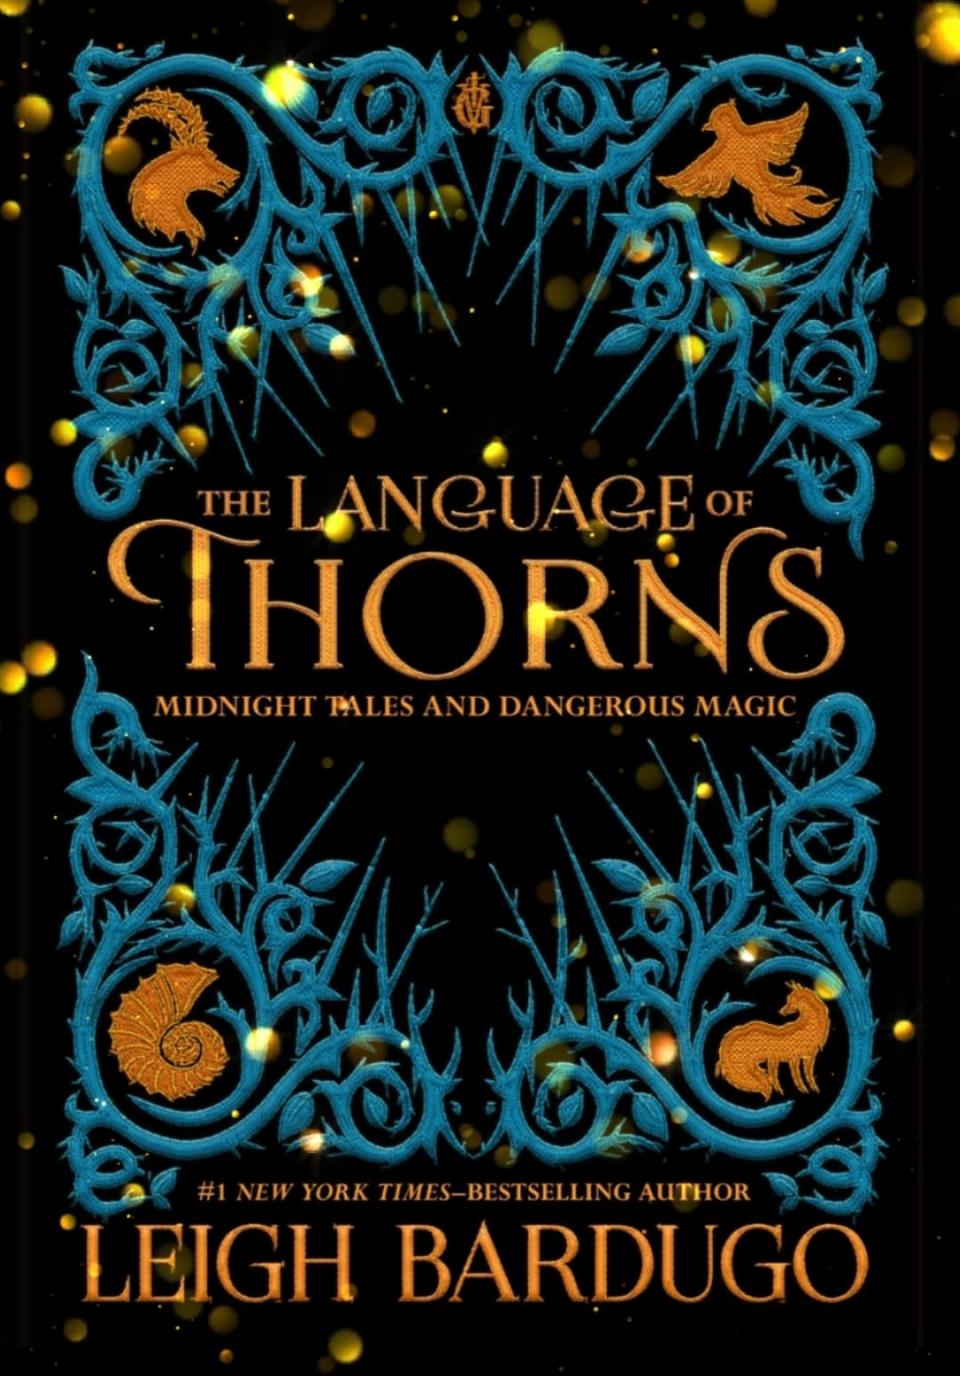 The Language of Thorns: Midnight Tales and Dangerous Magic Hardcover by Leigh Bardugo. Image via Sarah Rohoman.